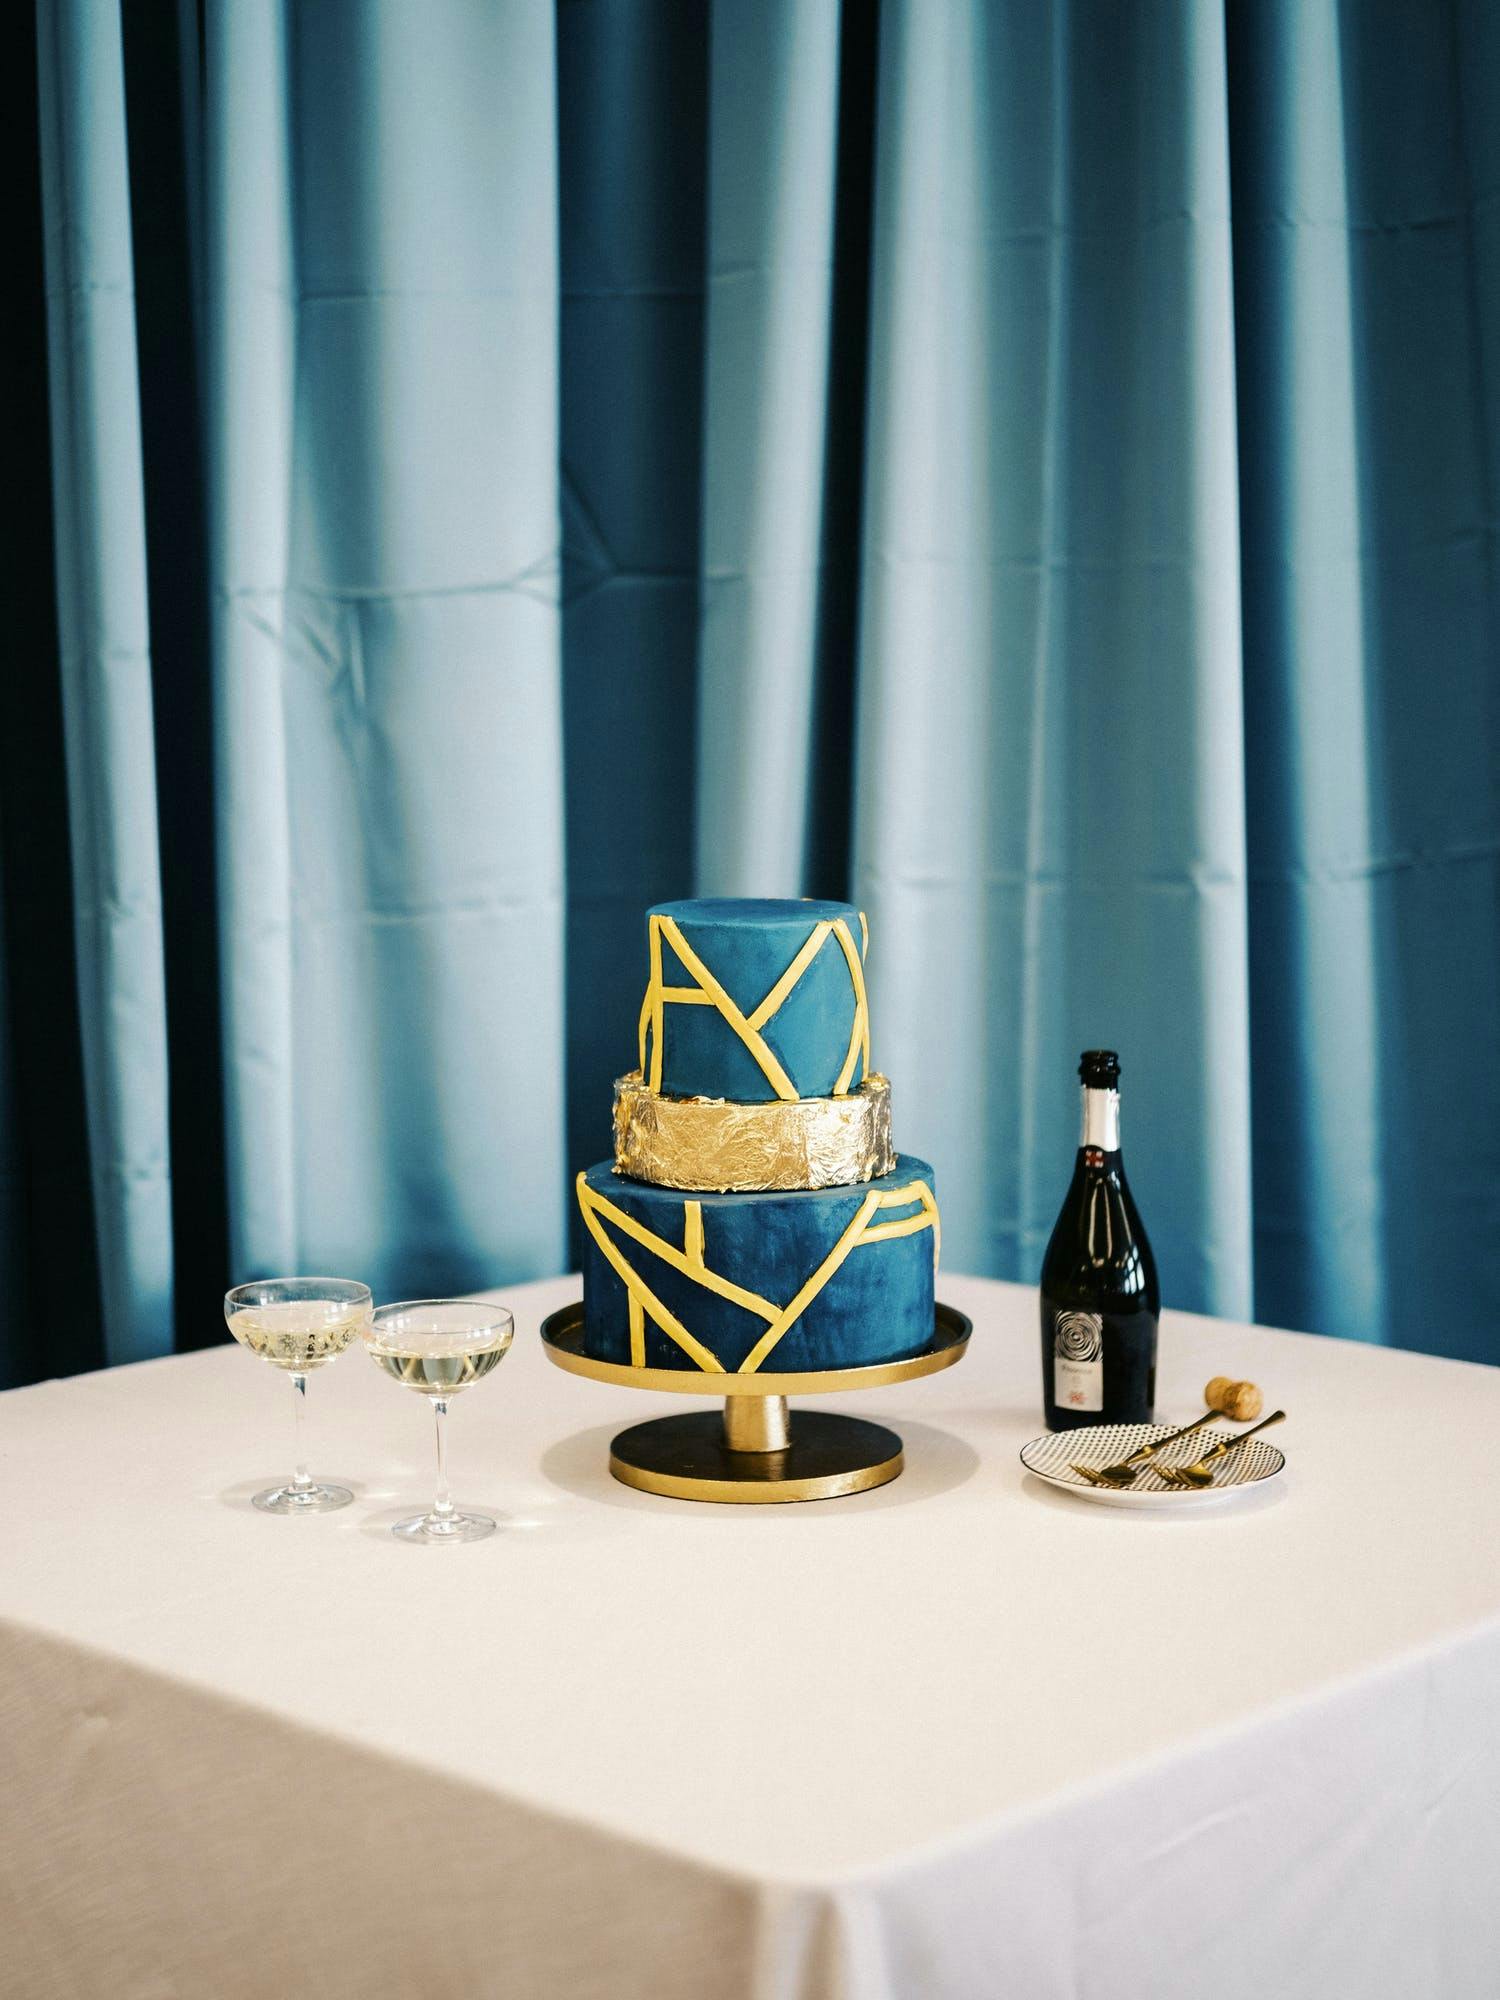 Three-tier blue and gold wedding cake with asymmetrical faceted shapes | PartySlate